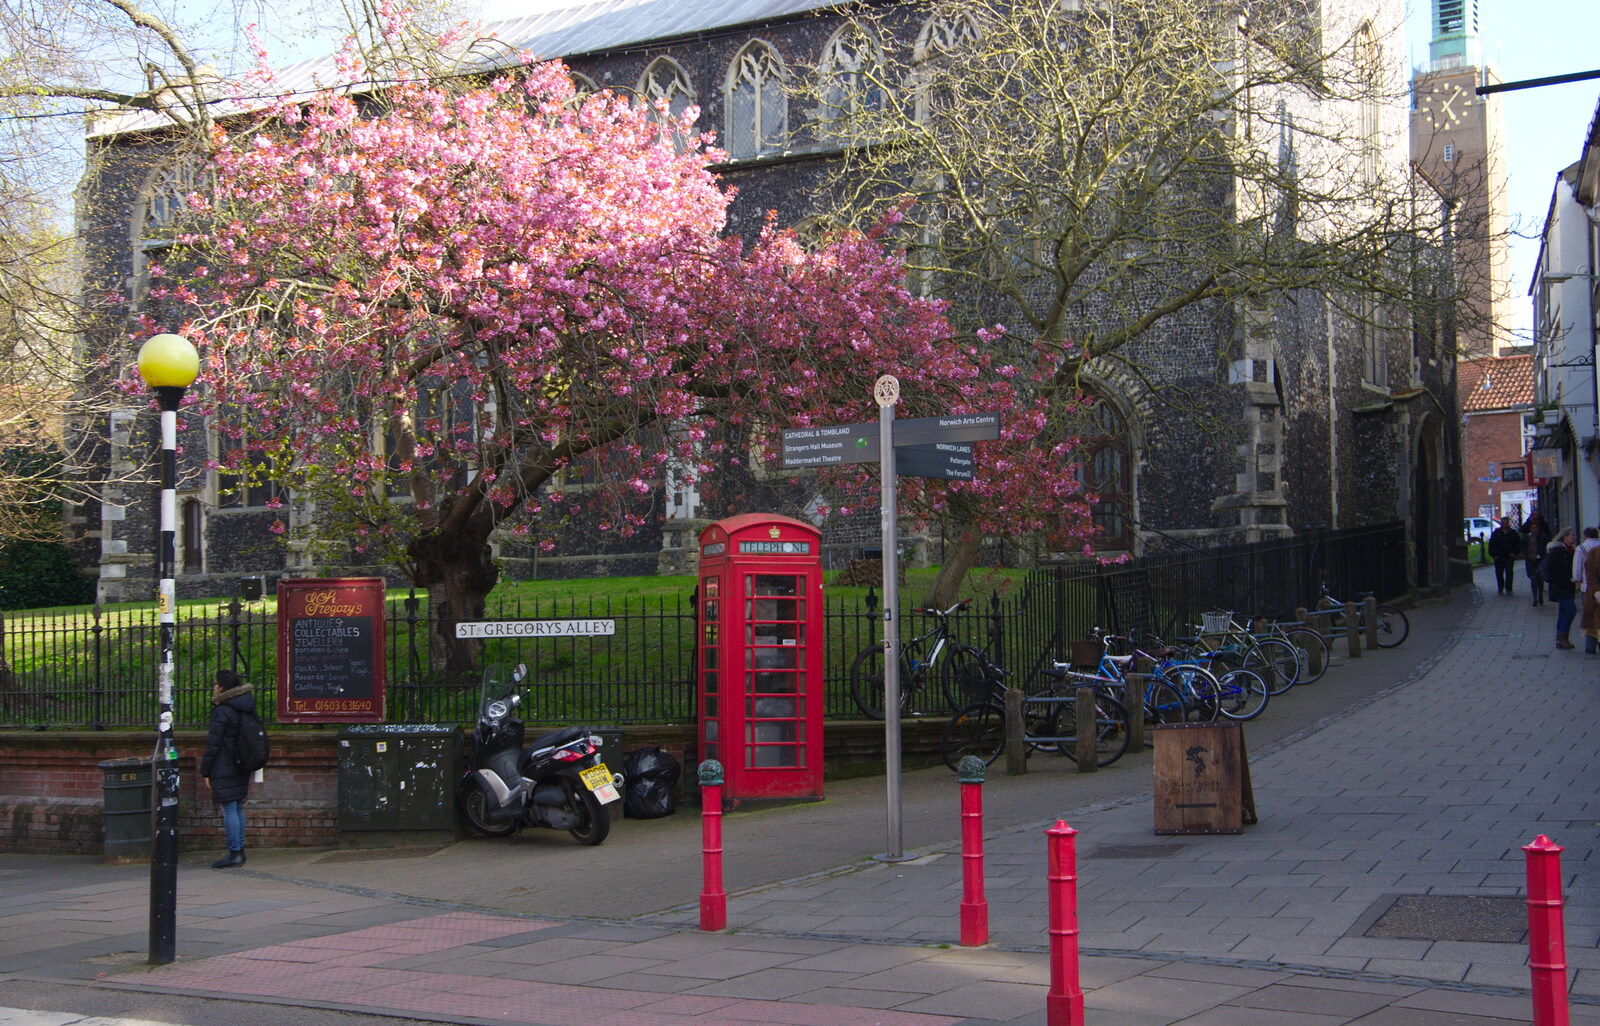 Cherry blossom at the bottom of St. Gregory's Alley from Singing in John Lewis, Norwich, Norfolk - 13th April 2019